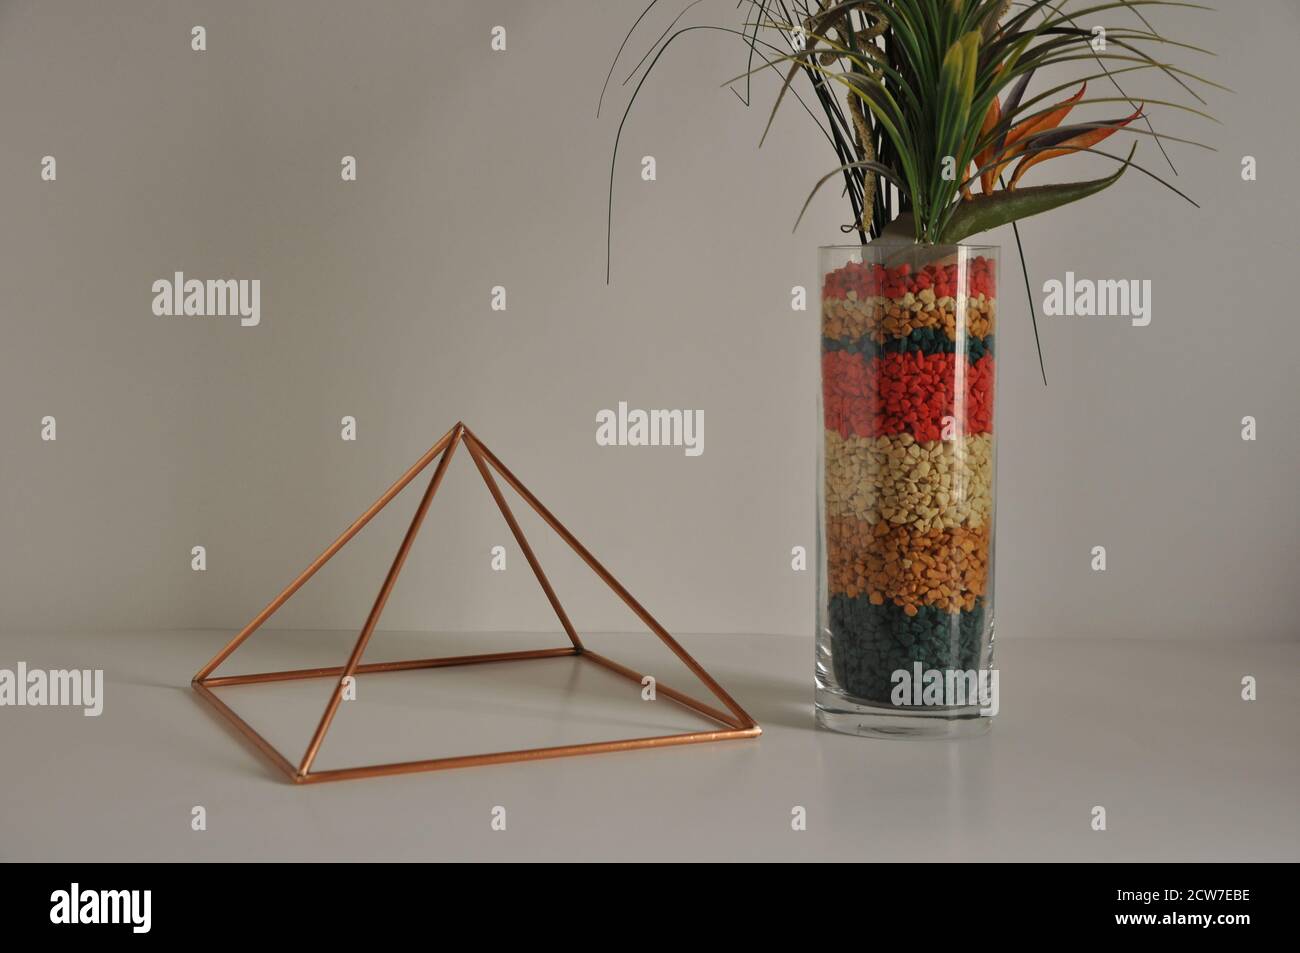 Pyramid Copper. pyramid with glass vase and decoration with unnatural flowers, with stones and multicolored flowers in base and white background. Stock Photo